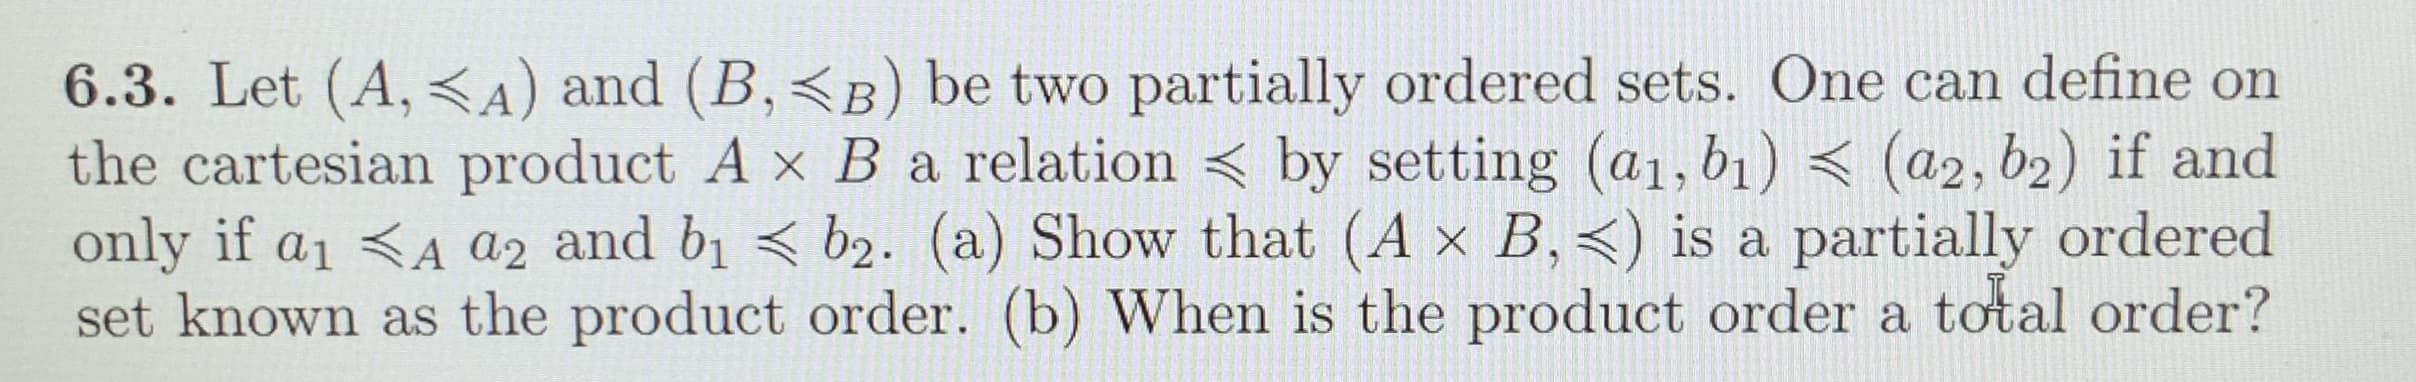 6.3. Let (A, <A) and (B,<B) be two partially ordered sets. One can define on
the cartesian product A x B a relation < by setting (a1, b1) < (a2, b2) if and
only if a1 <A az and b1 < b2. (a) Show that (A x B,<) is a partially ordered
set known as the product order. (b) When is the product order a total order?
